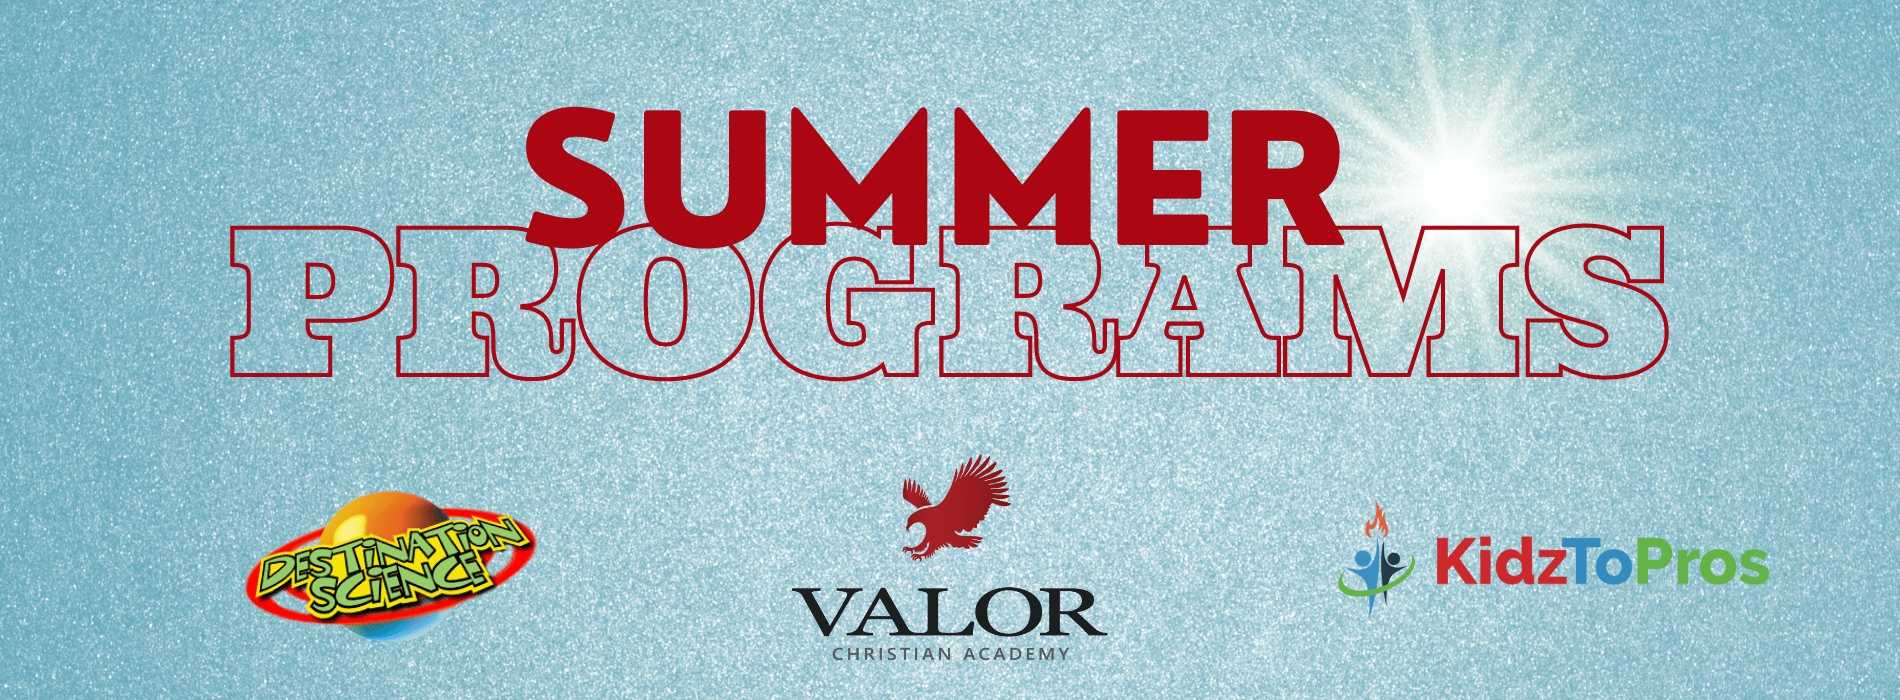 Summer Programs hosted by Valor Christian Academy - click banner to link to summer program page